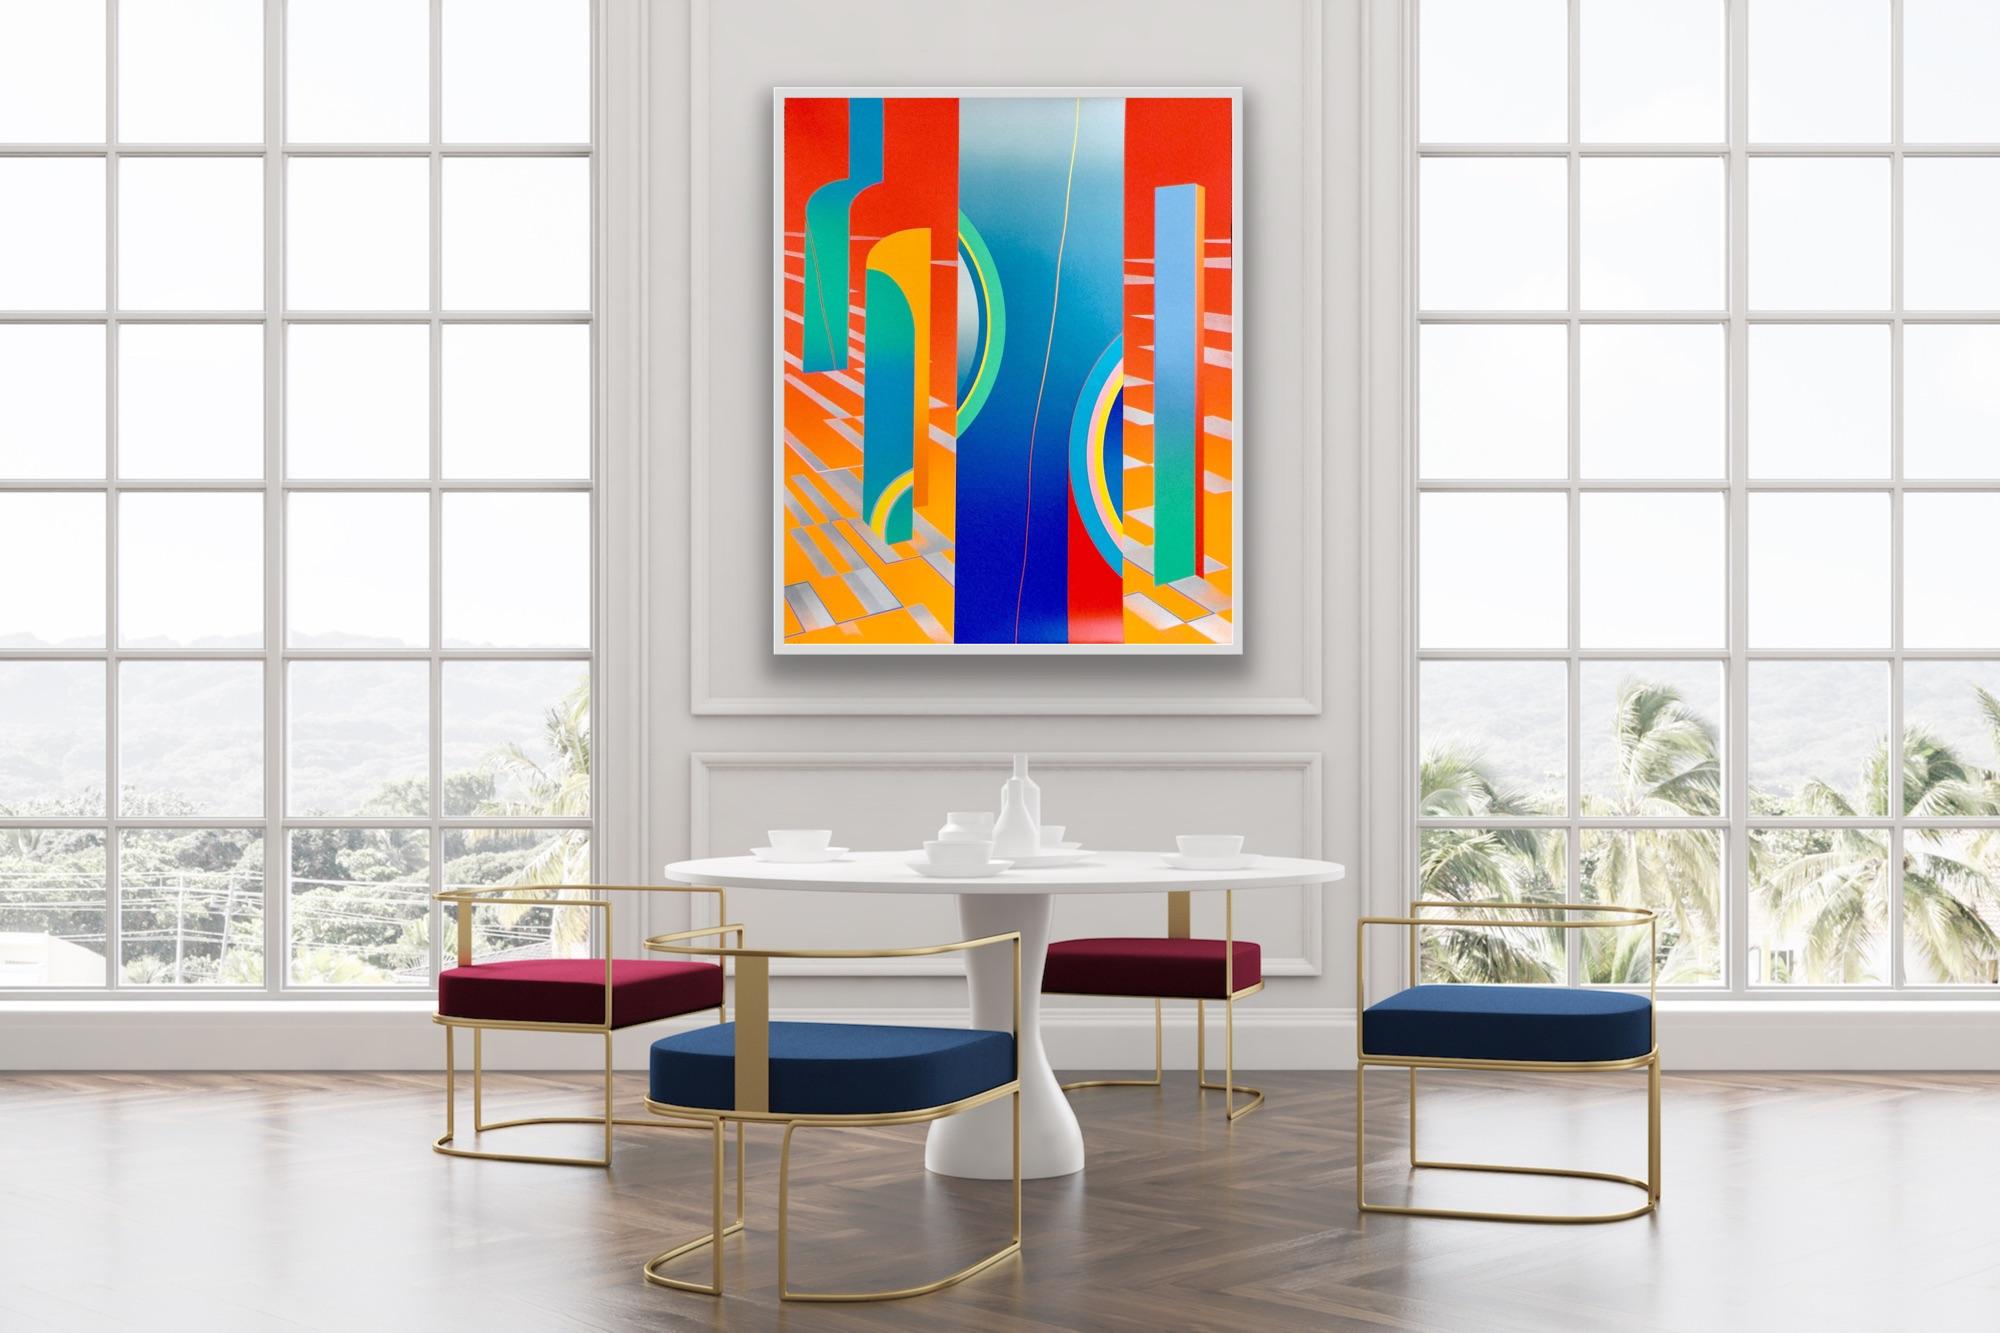 Collectors Limited Edition 1980's warm colourful abstract geometric graphic 1 For Sale 1